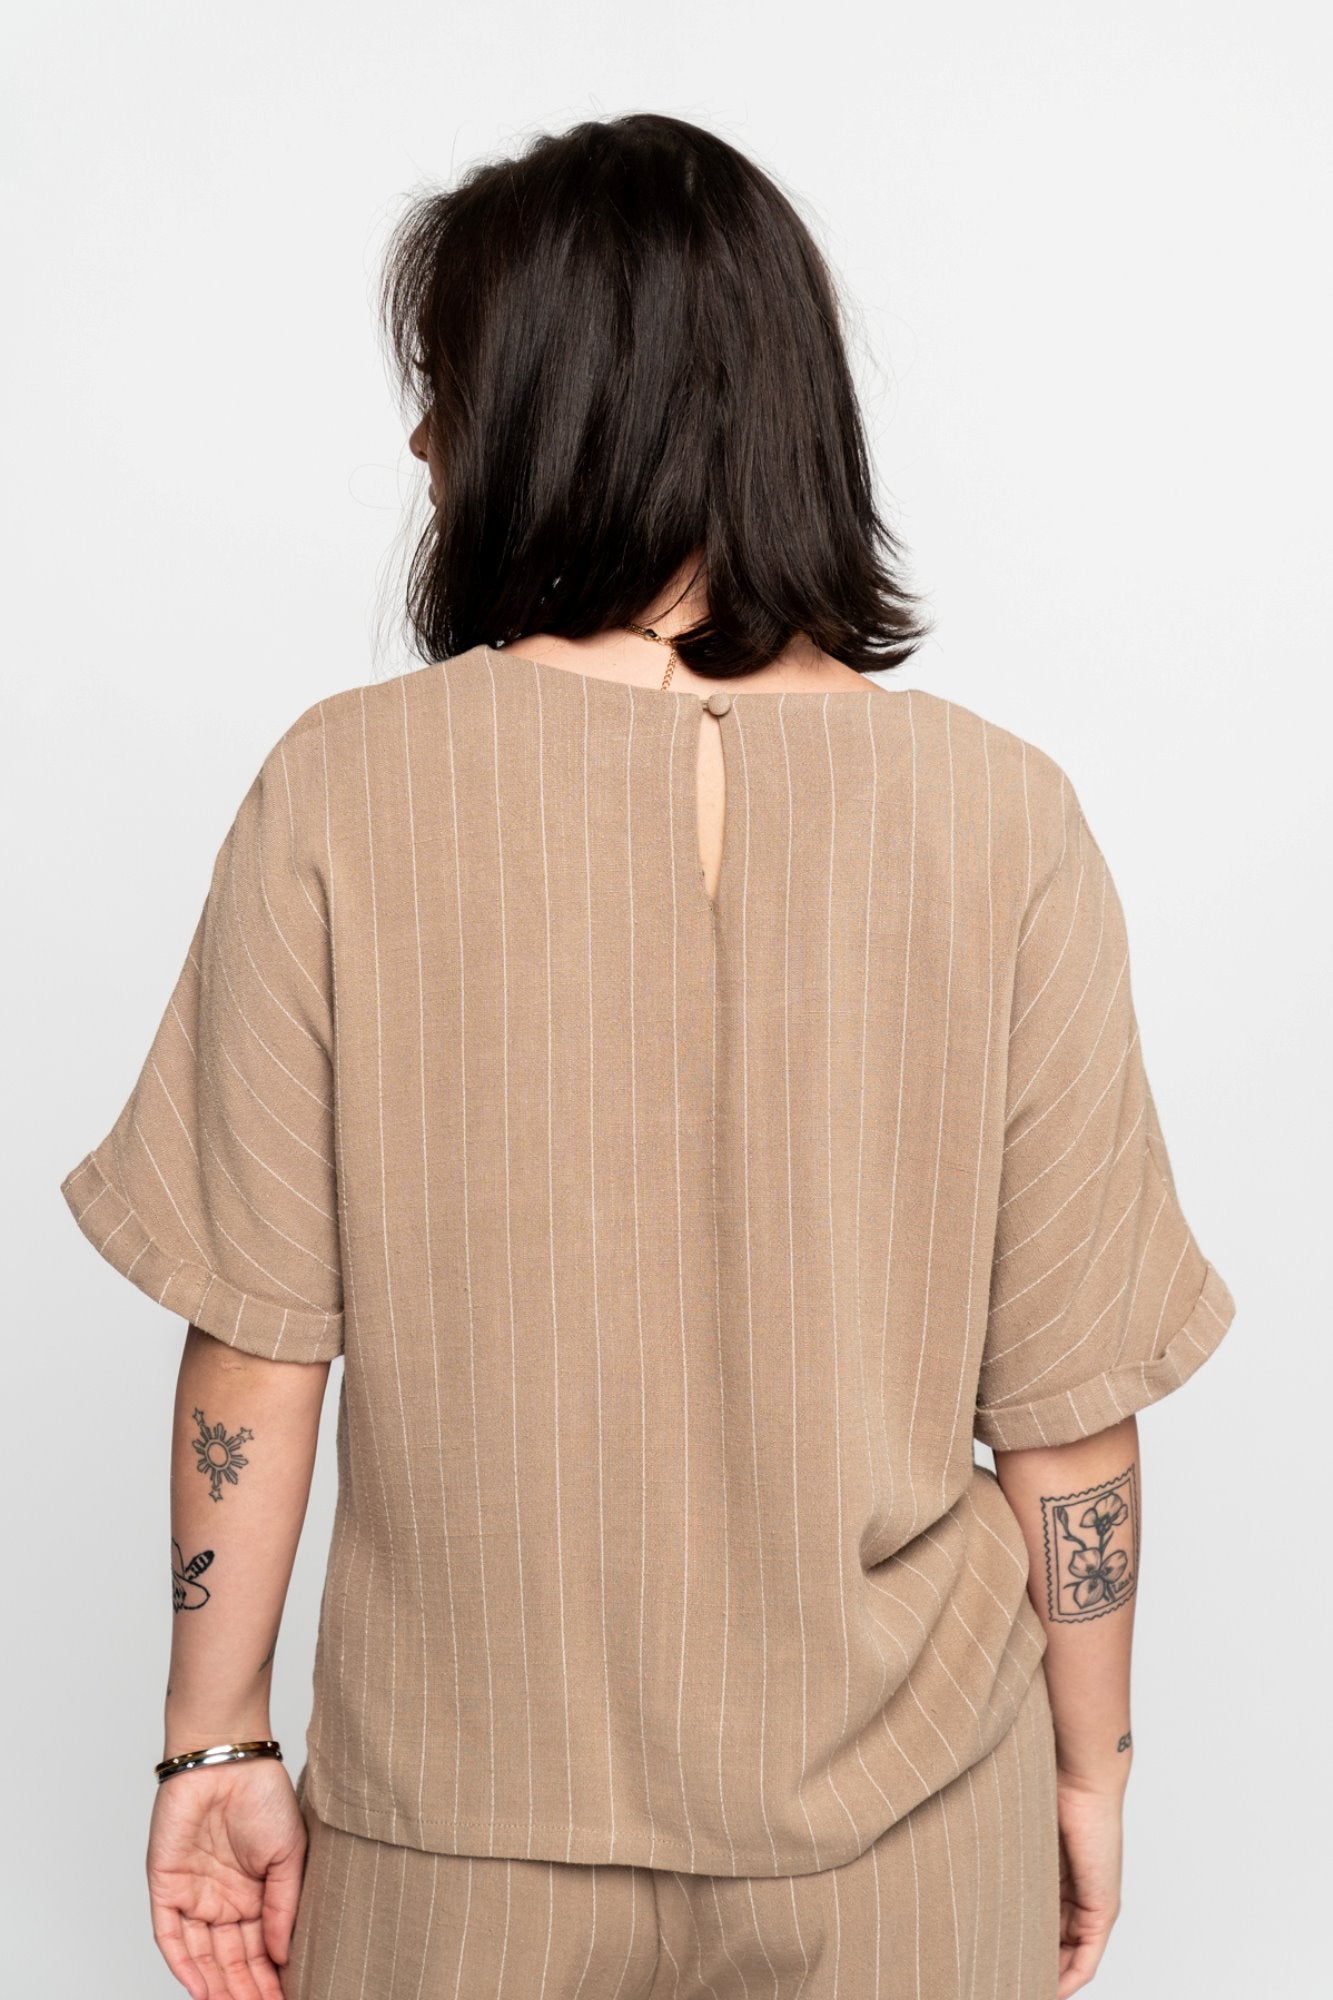 Sydney Top in Fawn Holley Girl 